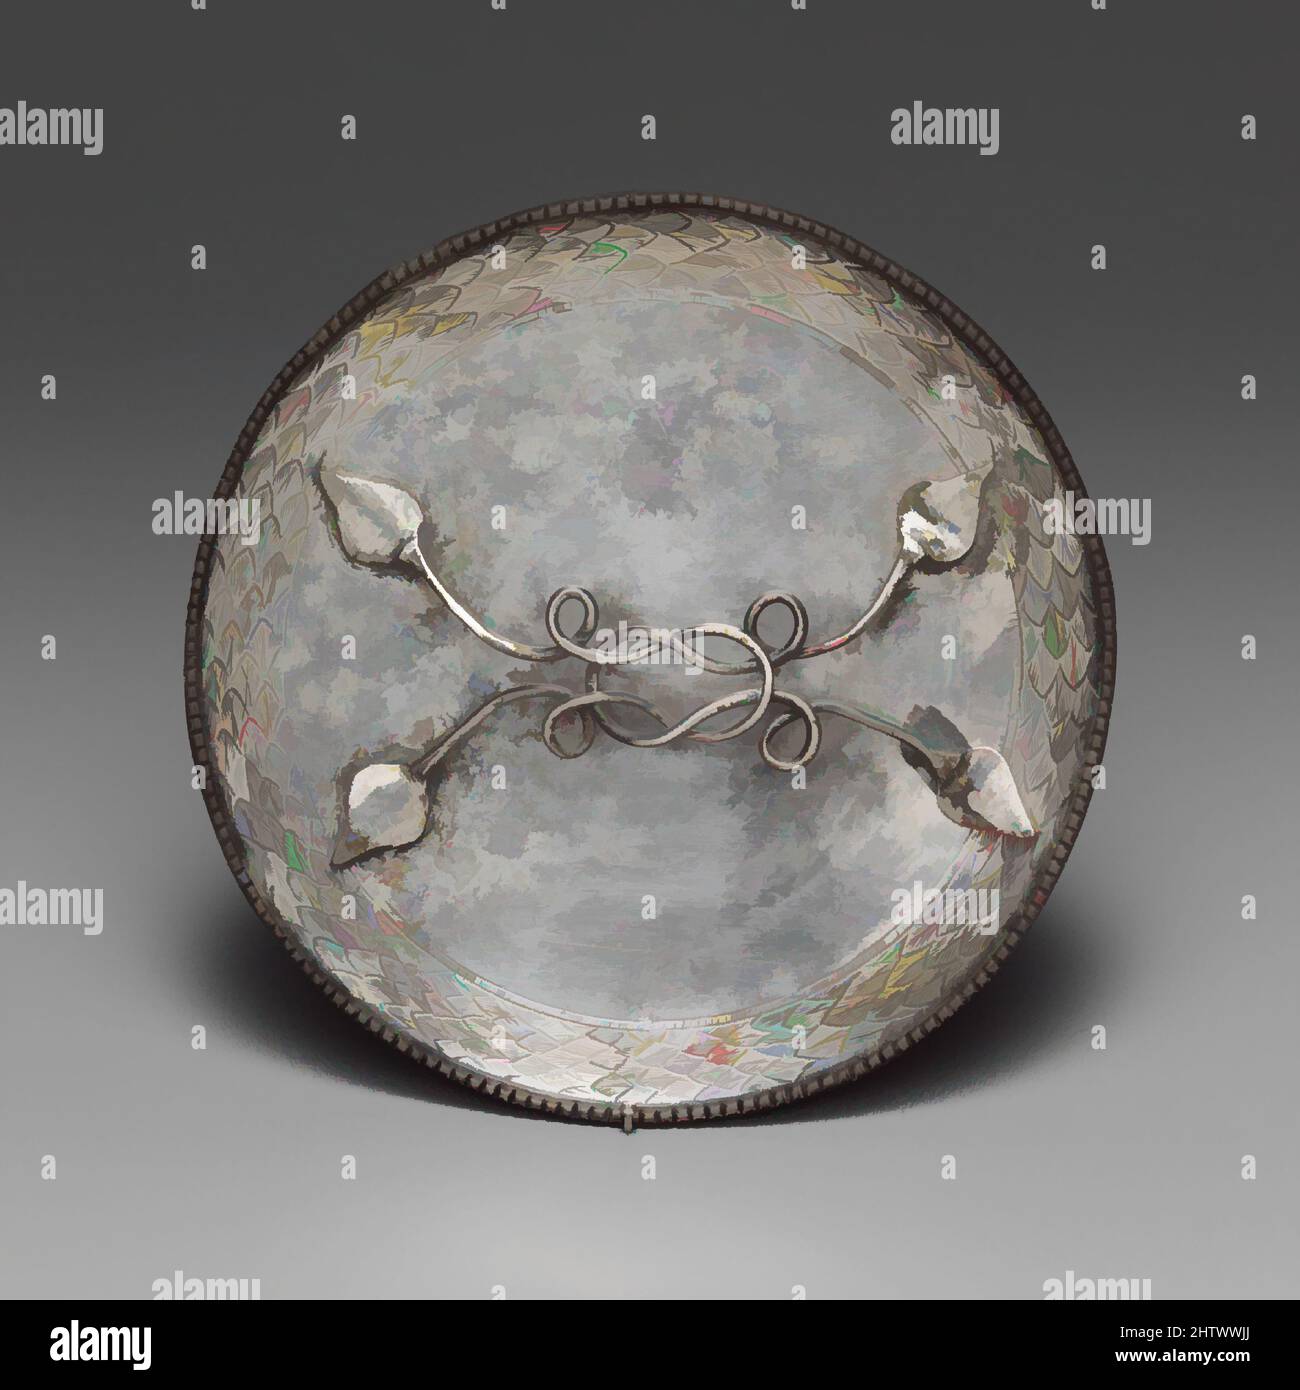 Art inspired by Silver mirror, Imperial, 4th century A.D., Roman, Silver, Diam.: 5 3/16 in. (13.2 cm), Gold and Silver, The type of mirror with a horizontal handle originated in the Roman world during the first century B.C. It was subsequently adopted in various cultures of Asia and, Classic works modernized by Artotop with a splash of modernity. Shapes, color and value, eye-catching visual impact on art. Emotions through freedom of artworks in a contemporary way. A timeless message pursuing a wildly creative new direction. Artists turning to the digital medium and creating the Artotop NFT Stock Photo